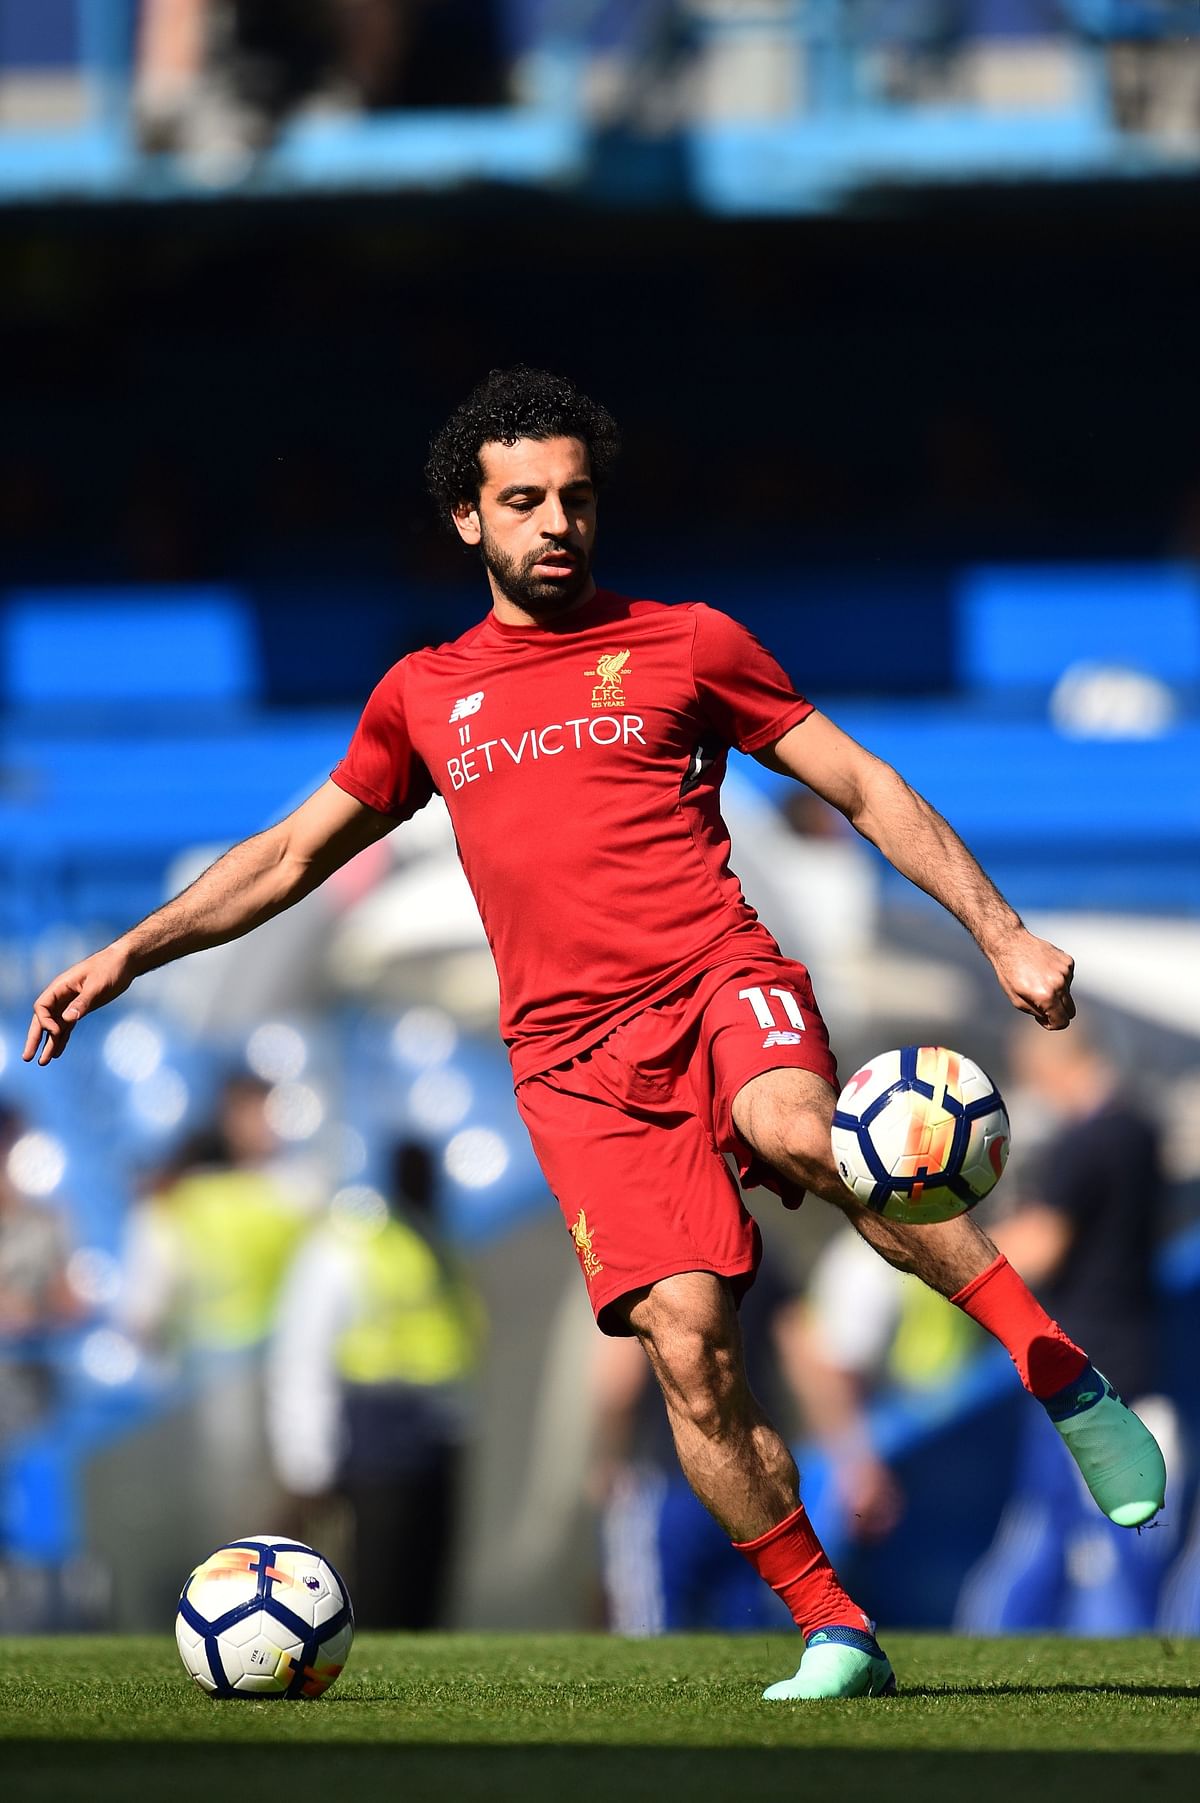 Liverpool's Egyptian midfielder Mohamed Salah warms up before the English Premier League football match between Chelsea and Liverpool at Stamford Bridge in London on 6 May, 2018. Photo: AFP